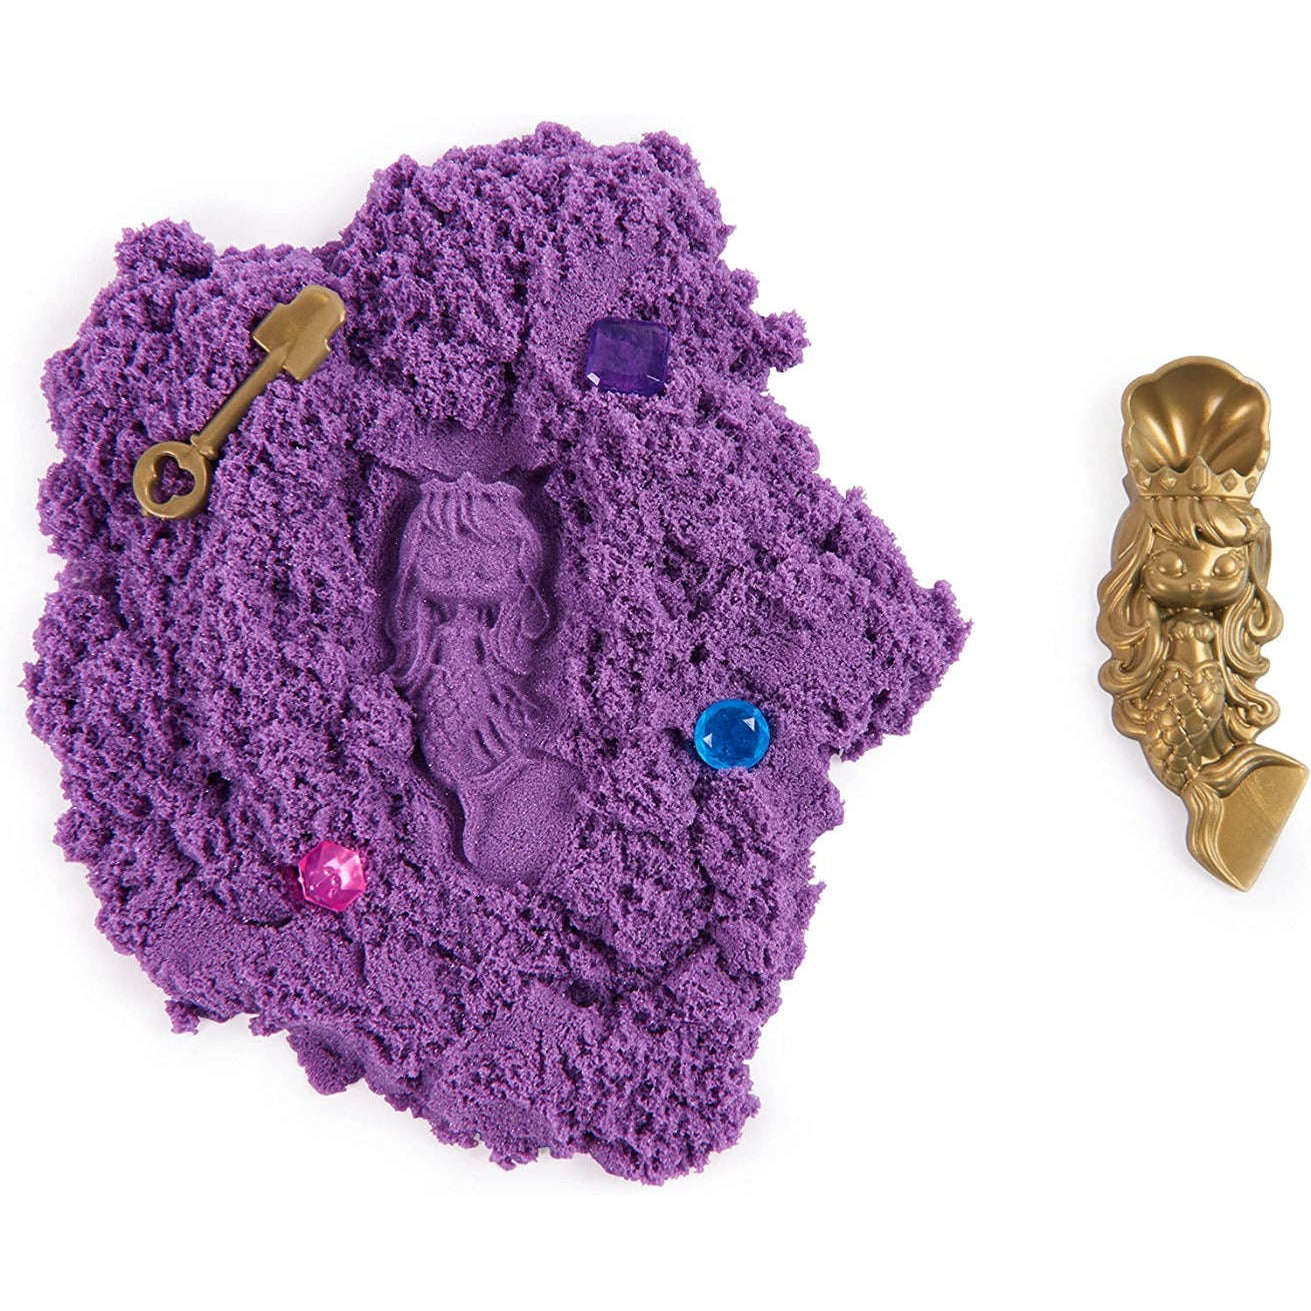 Kinetic Sand - Mold N' Flow » Fast Shipping » Fashion Online